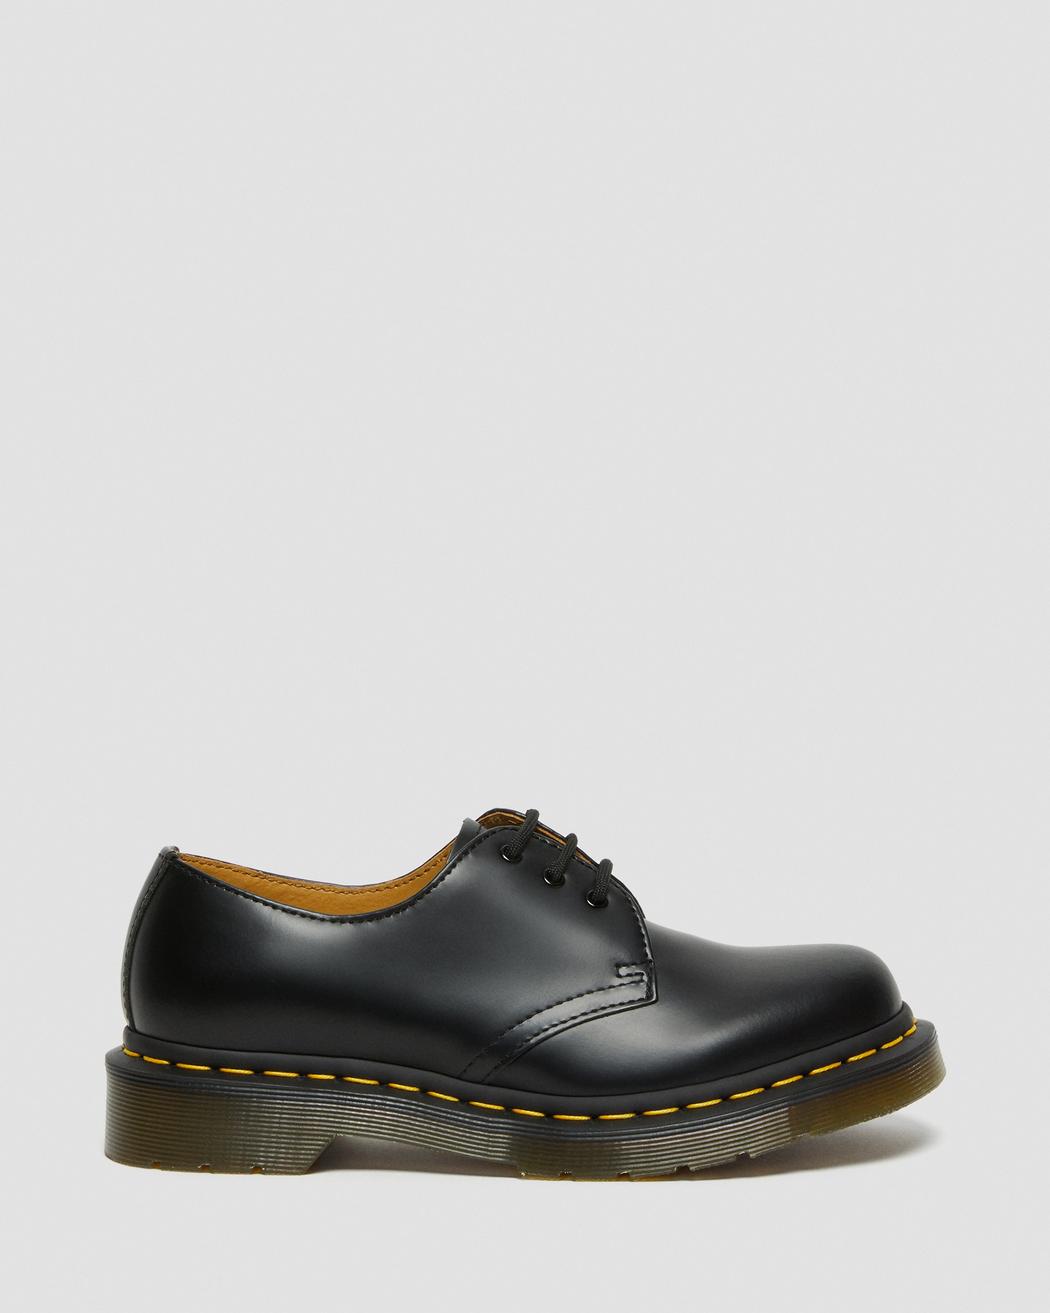 1461 Women's Smooth Leather Oxford Shoes | Dr. Martens